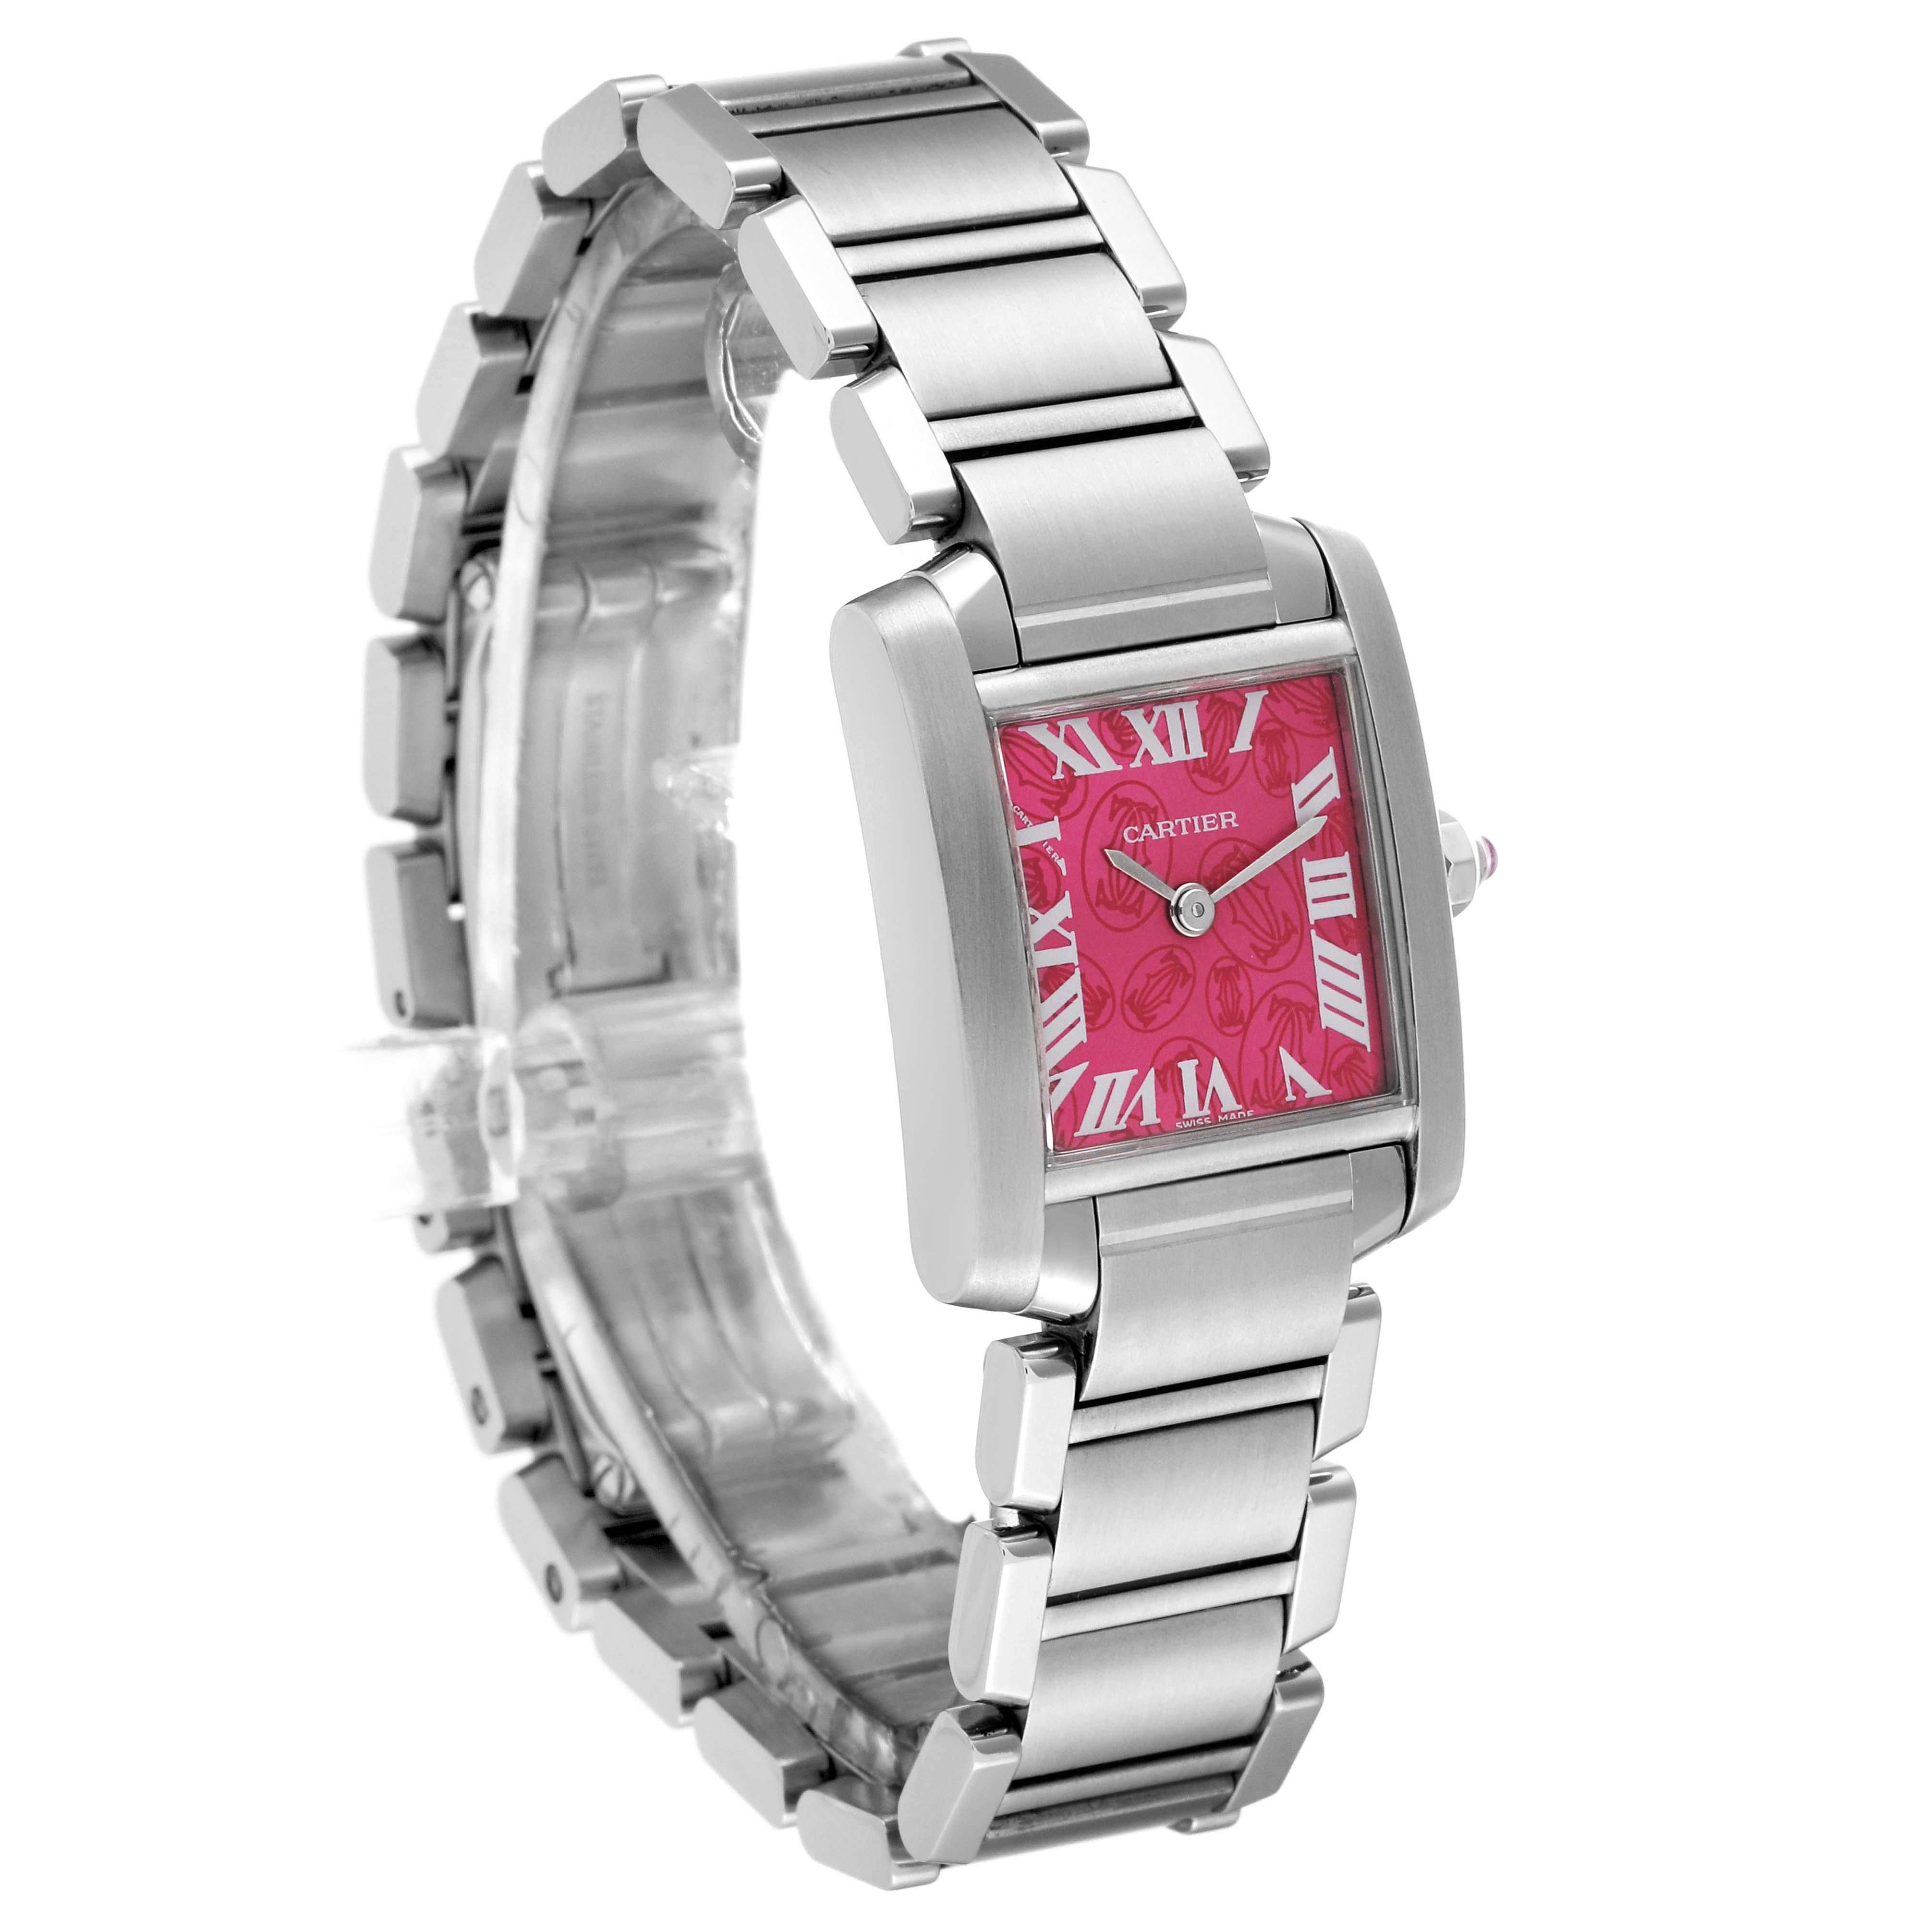 Cartier Tank Francaise Raspberry Dial Limited Edition Steel Watch W51030Q3 In Excellent Condition For Sale In Atlanta, GA